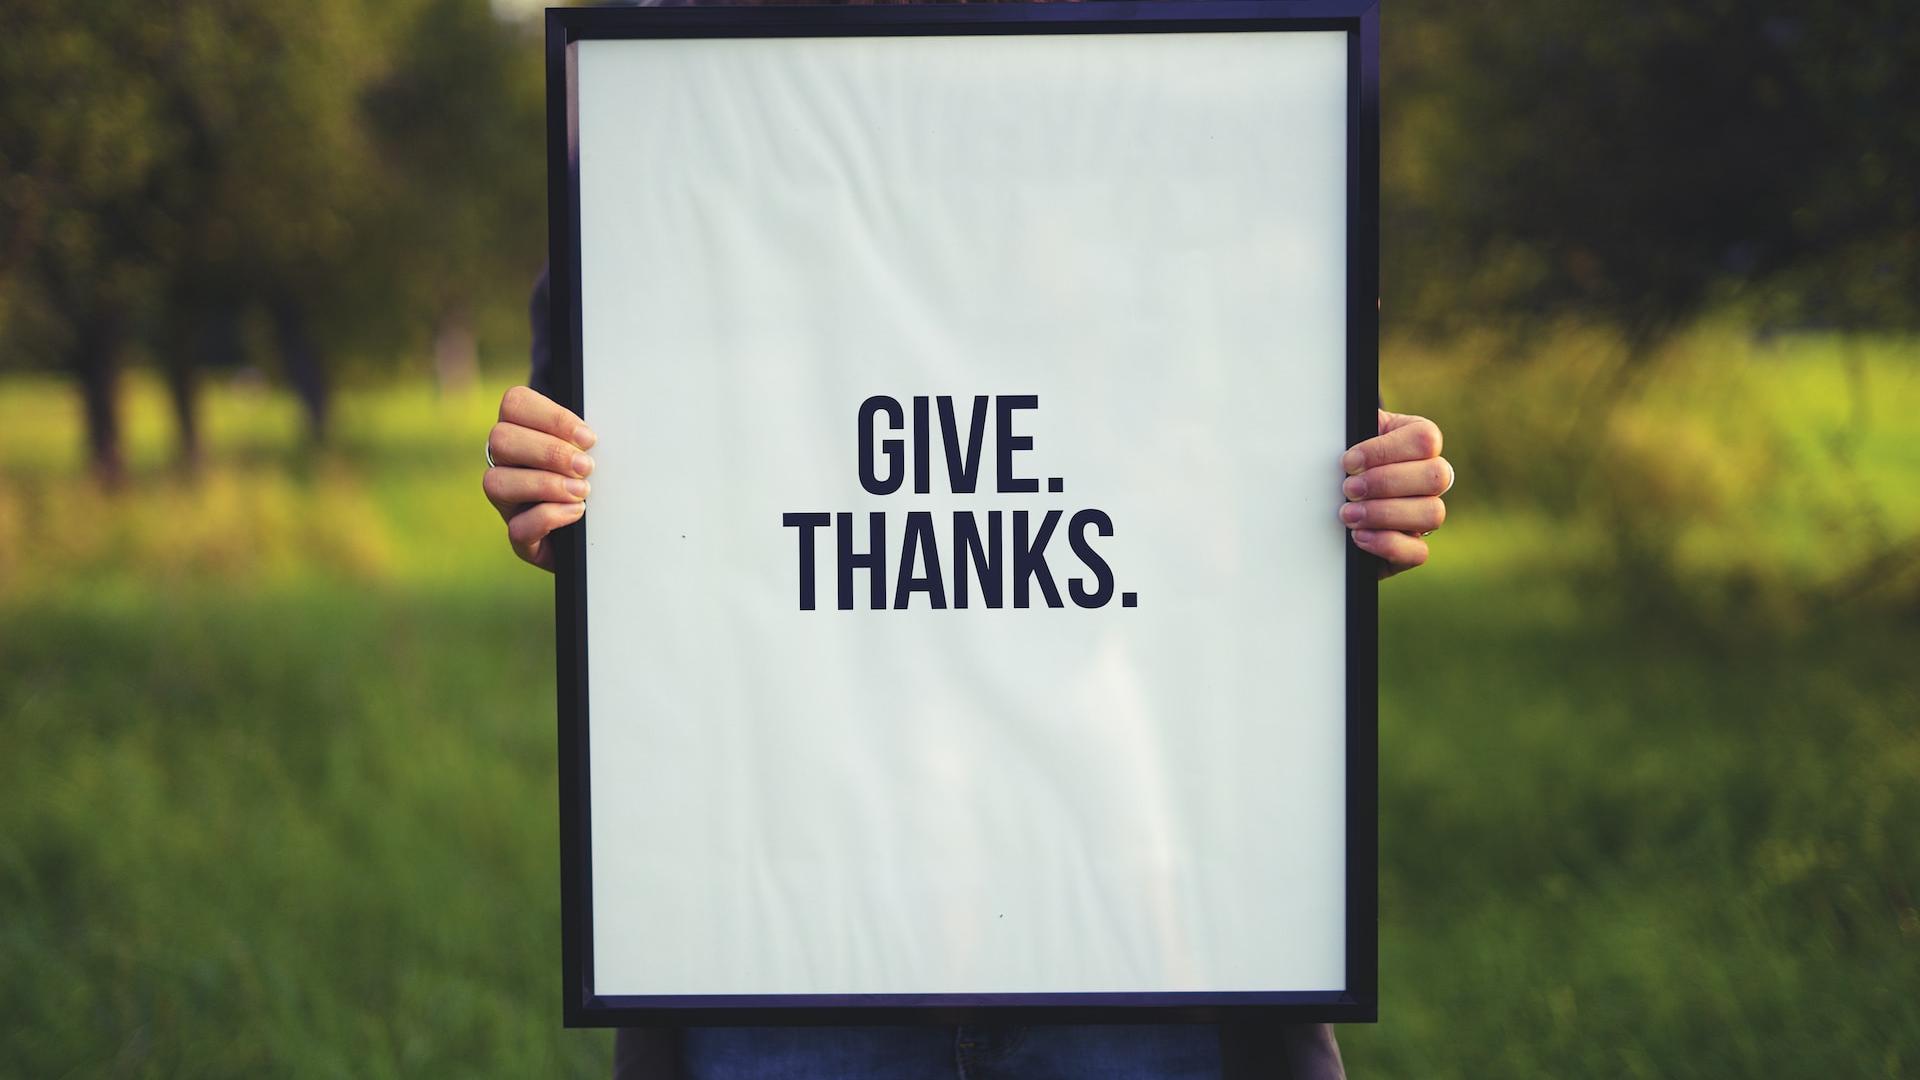 Person holding a sign in a field that says "Give. Thanks."